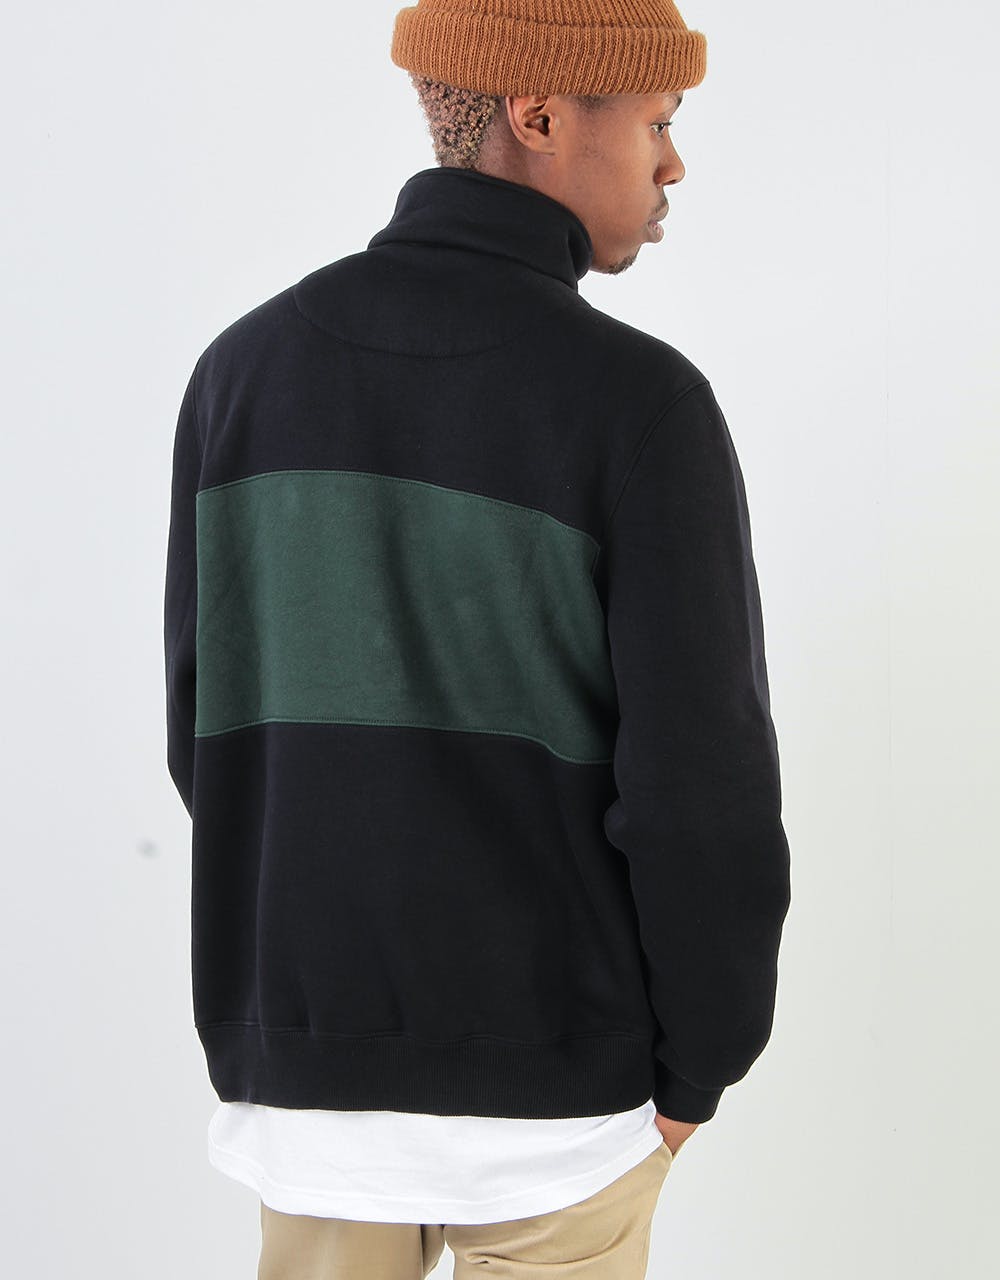 Route One Panelled 1/4 Zip Sweat - Navy/Forest/Navy